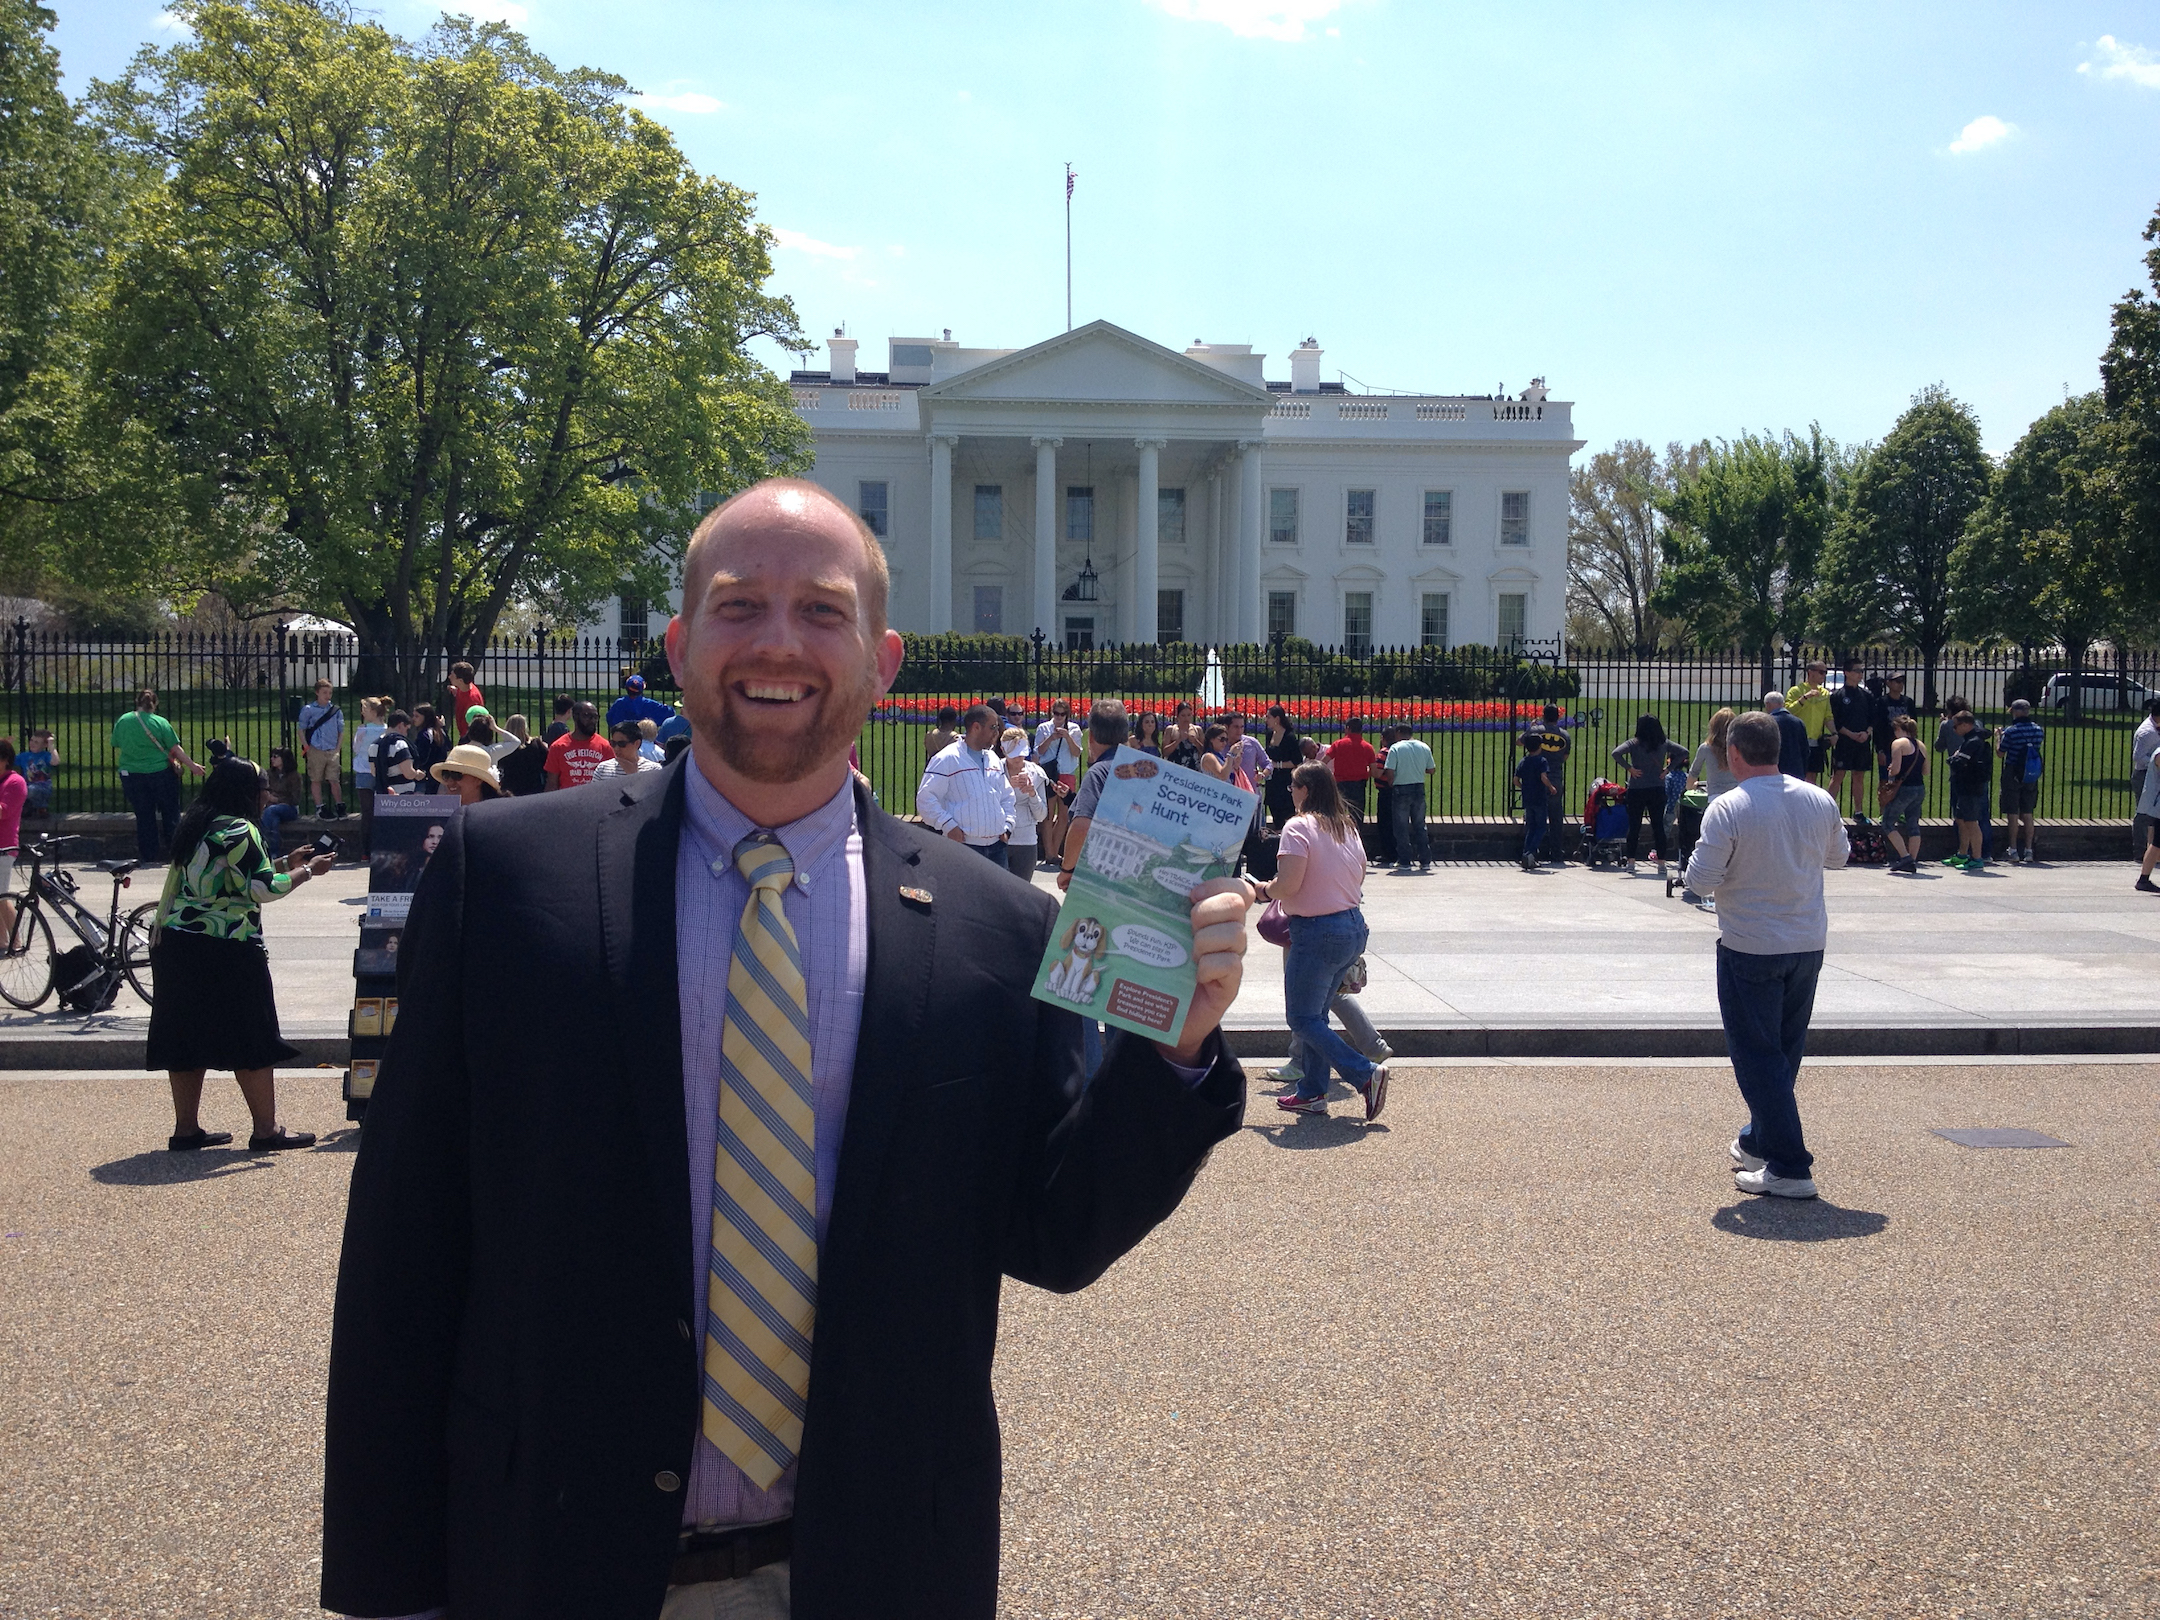 Jason Urroz stands outside the White House